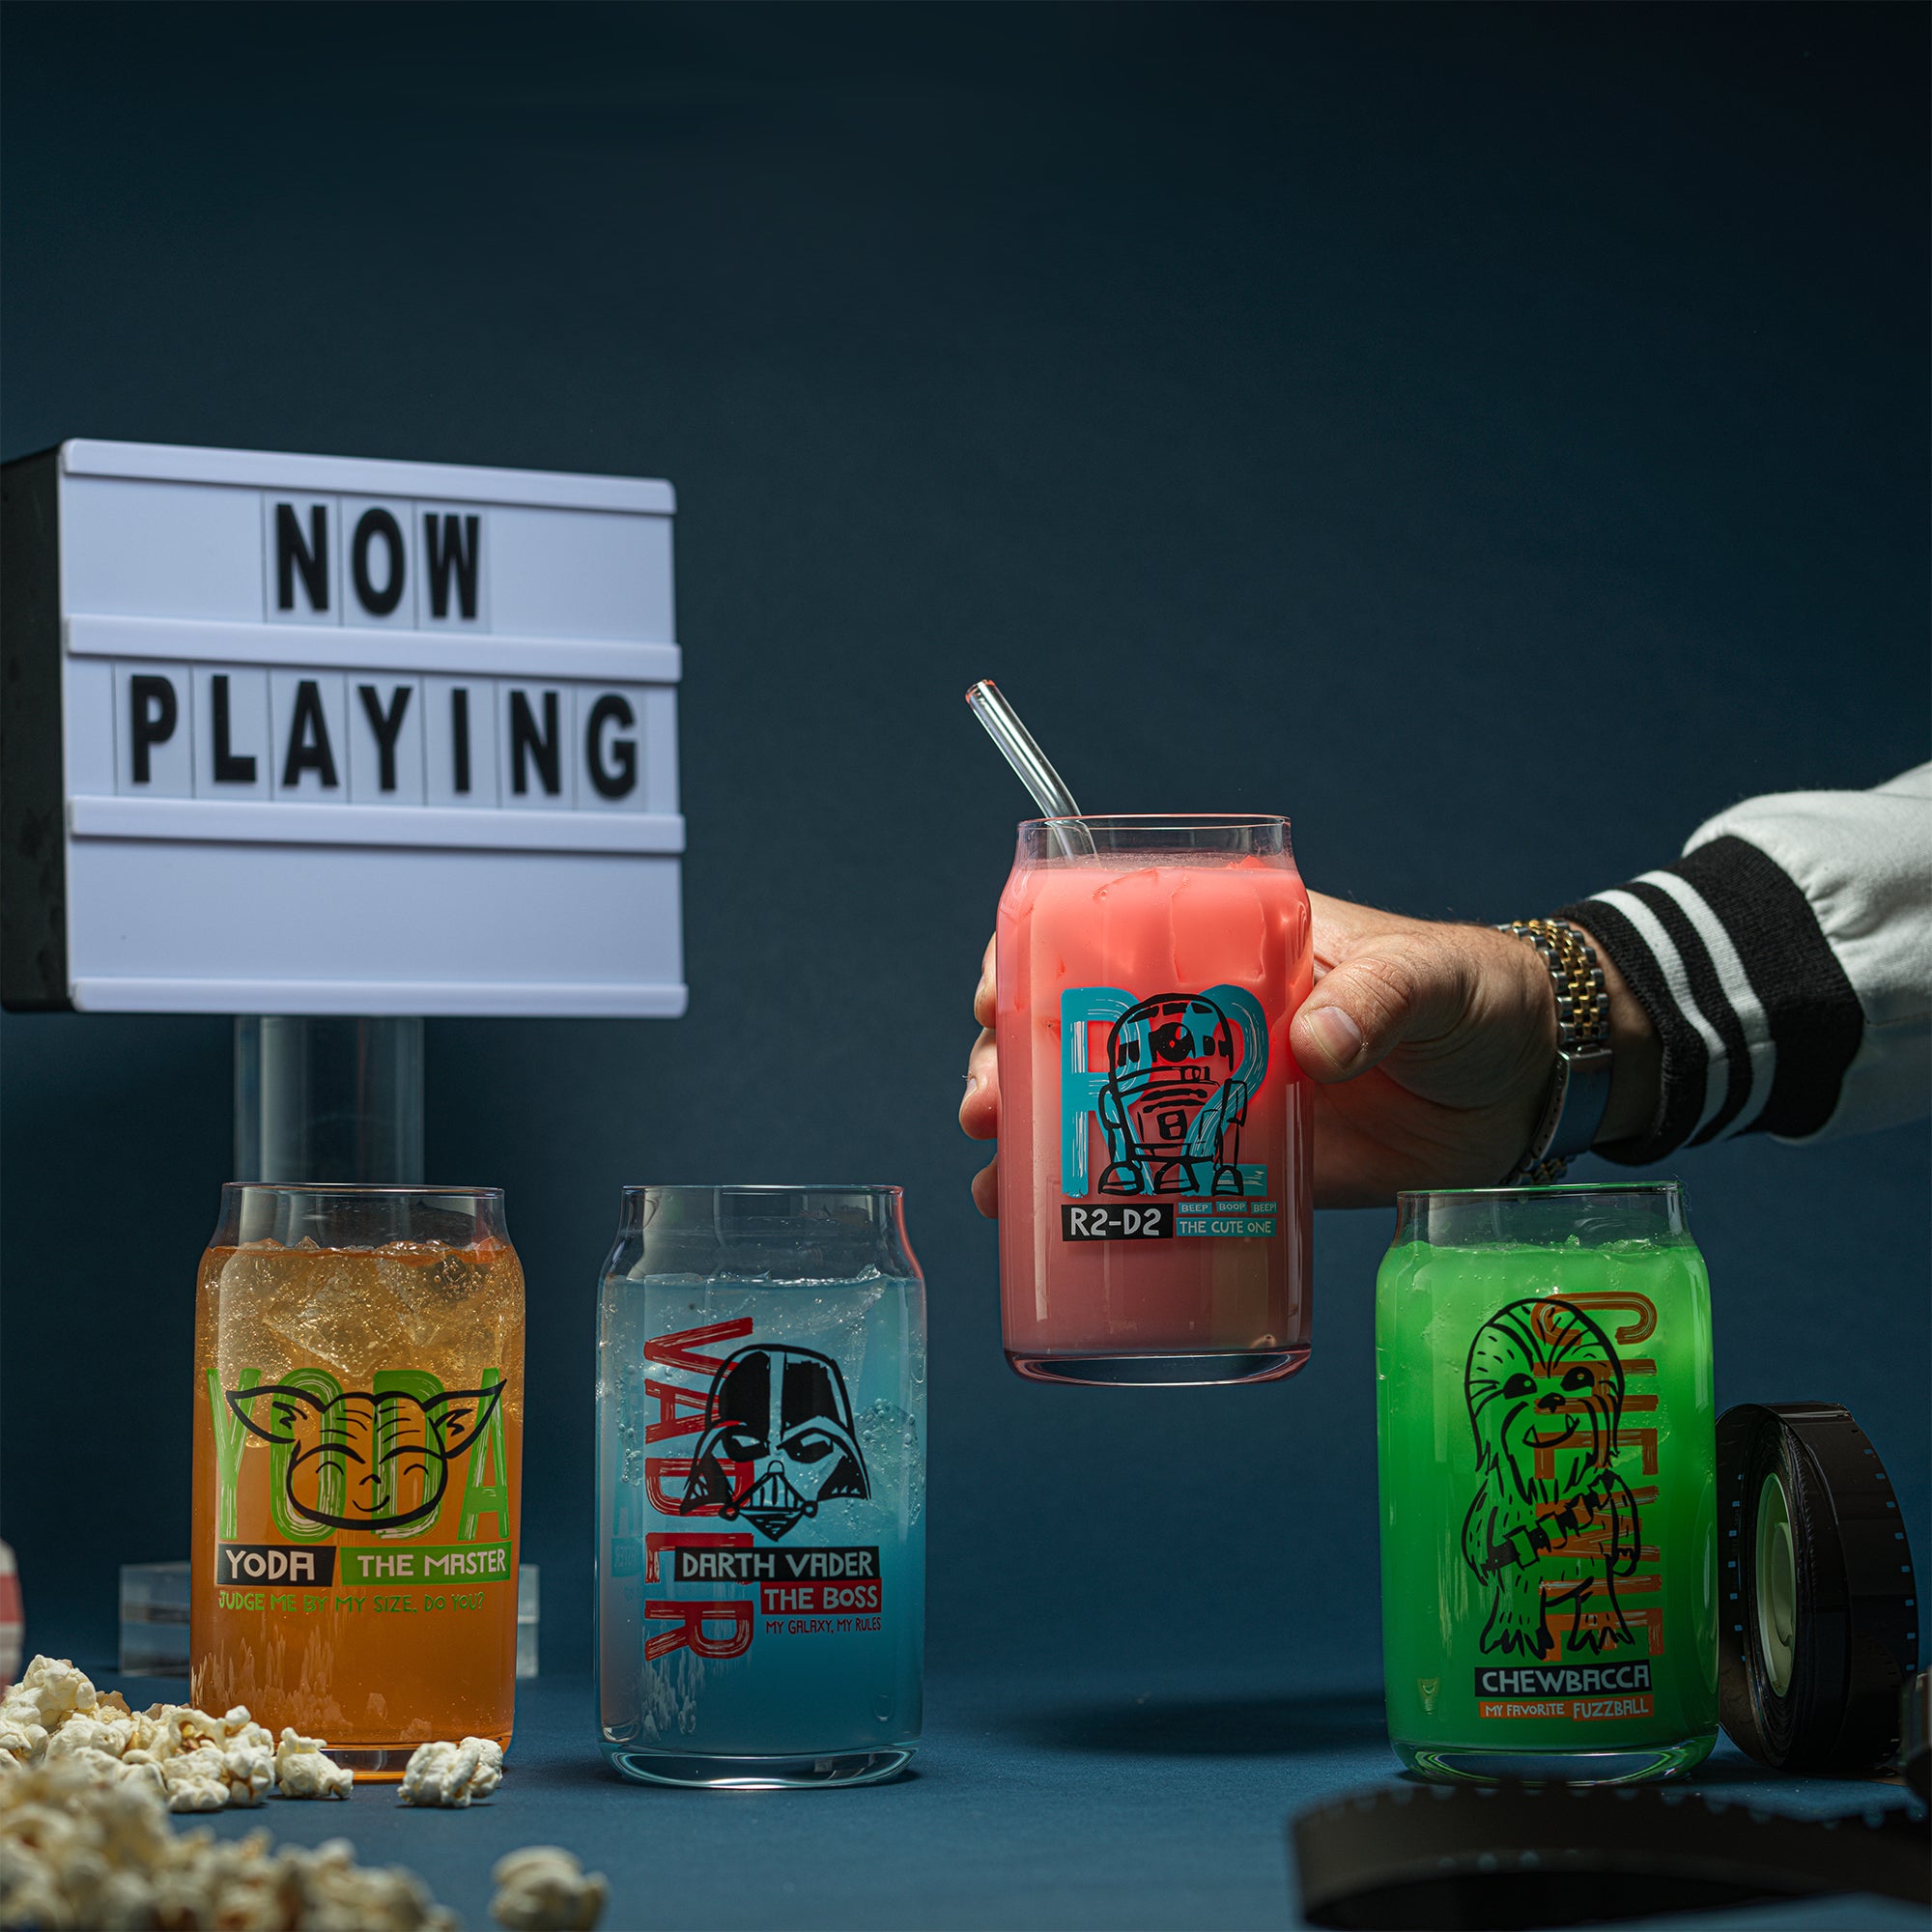 JoyJolt's Star Wars 'Now Playing' glass tumbler set. A 'Now Playing' movie sign in the background and some popcorn around the glasses. 